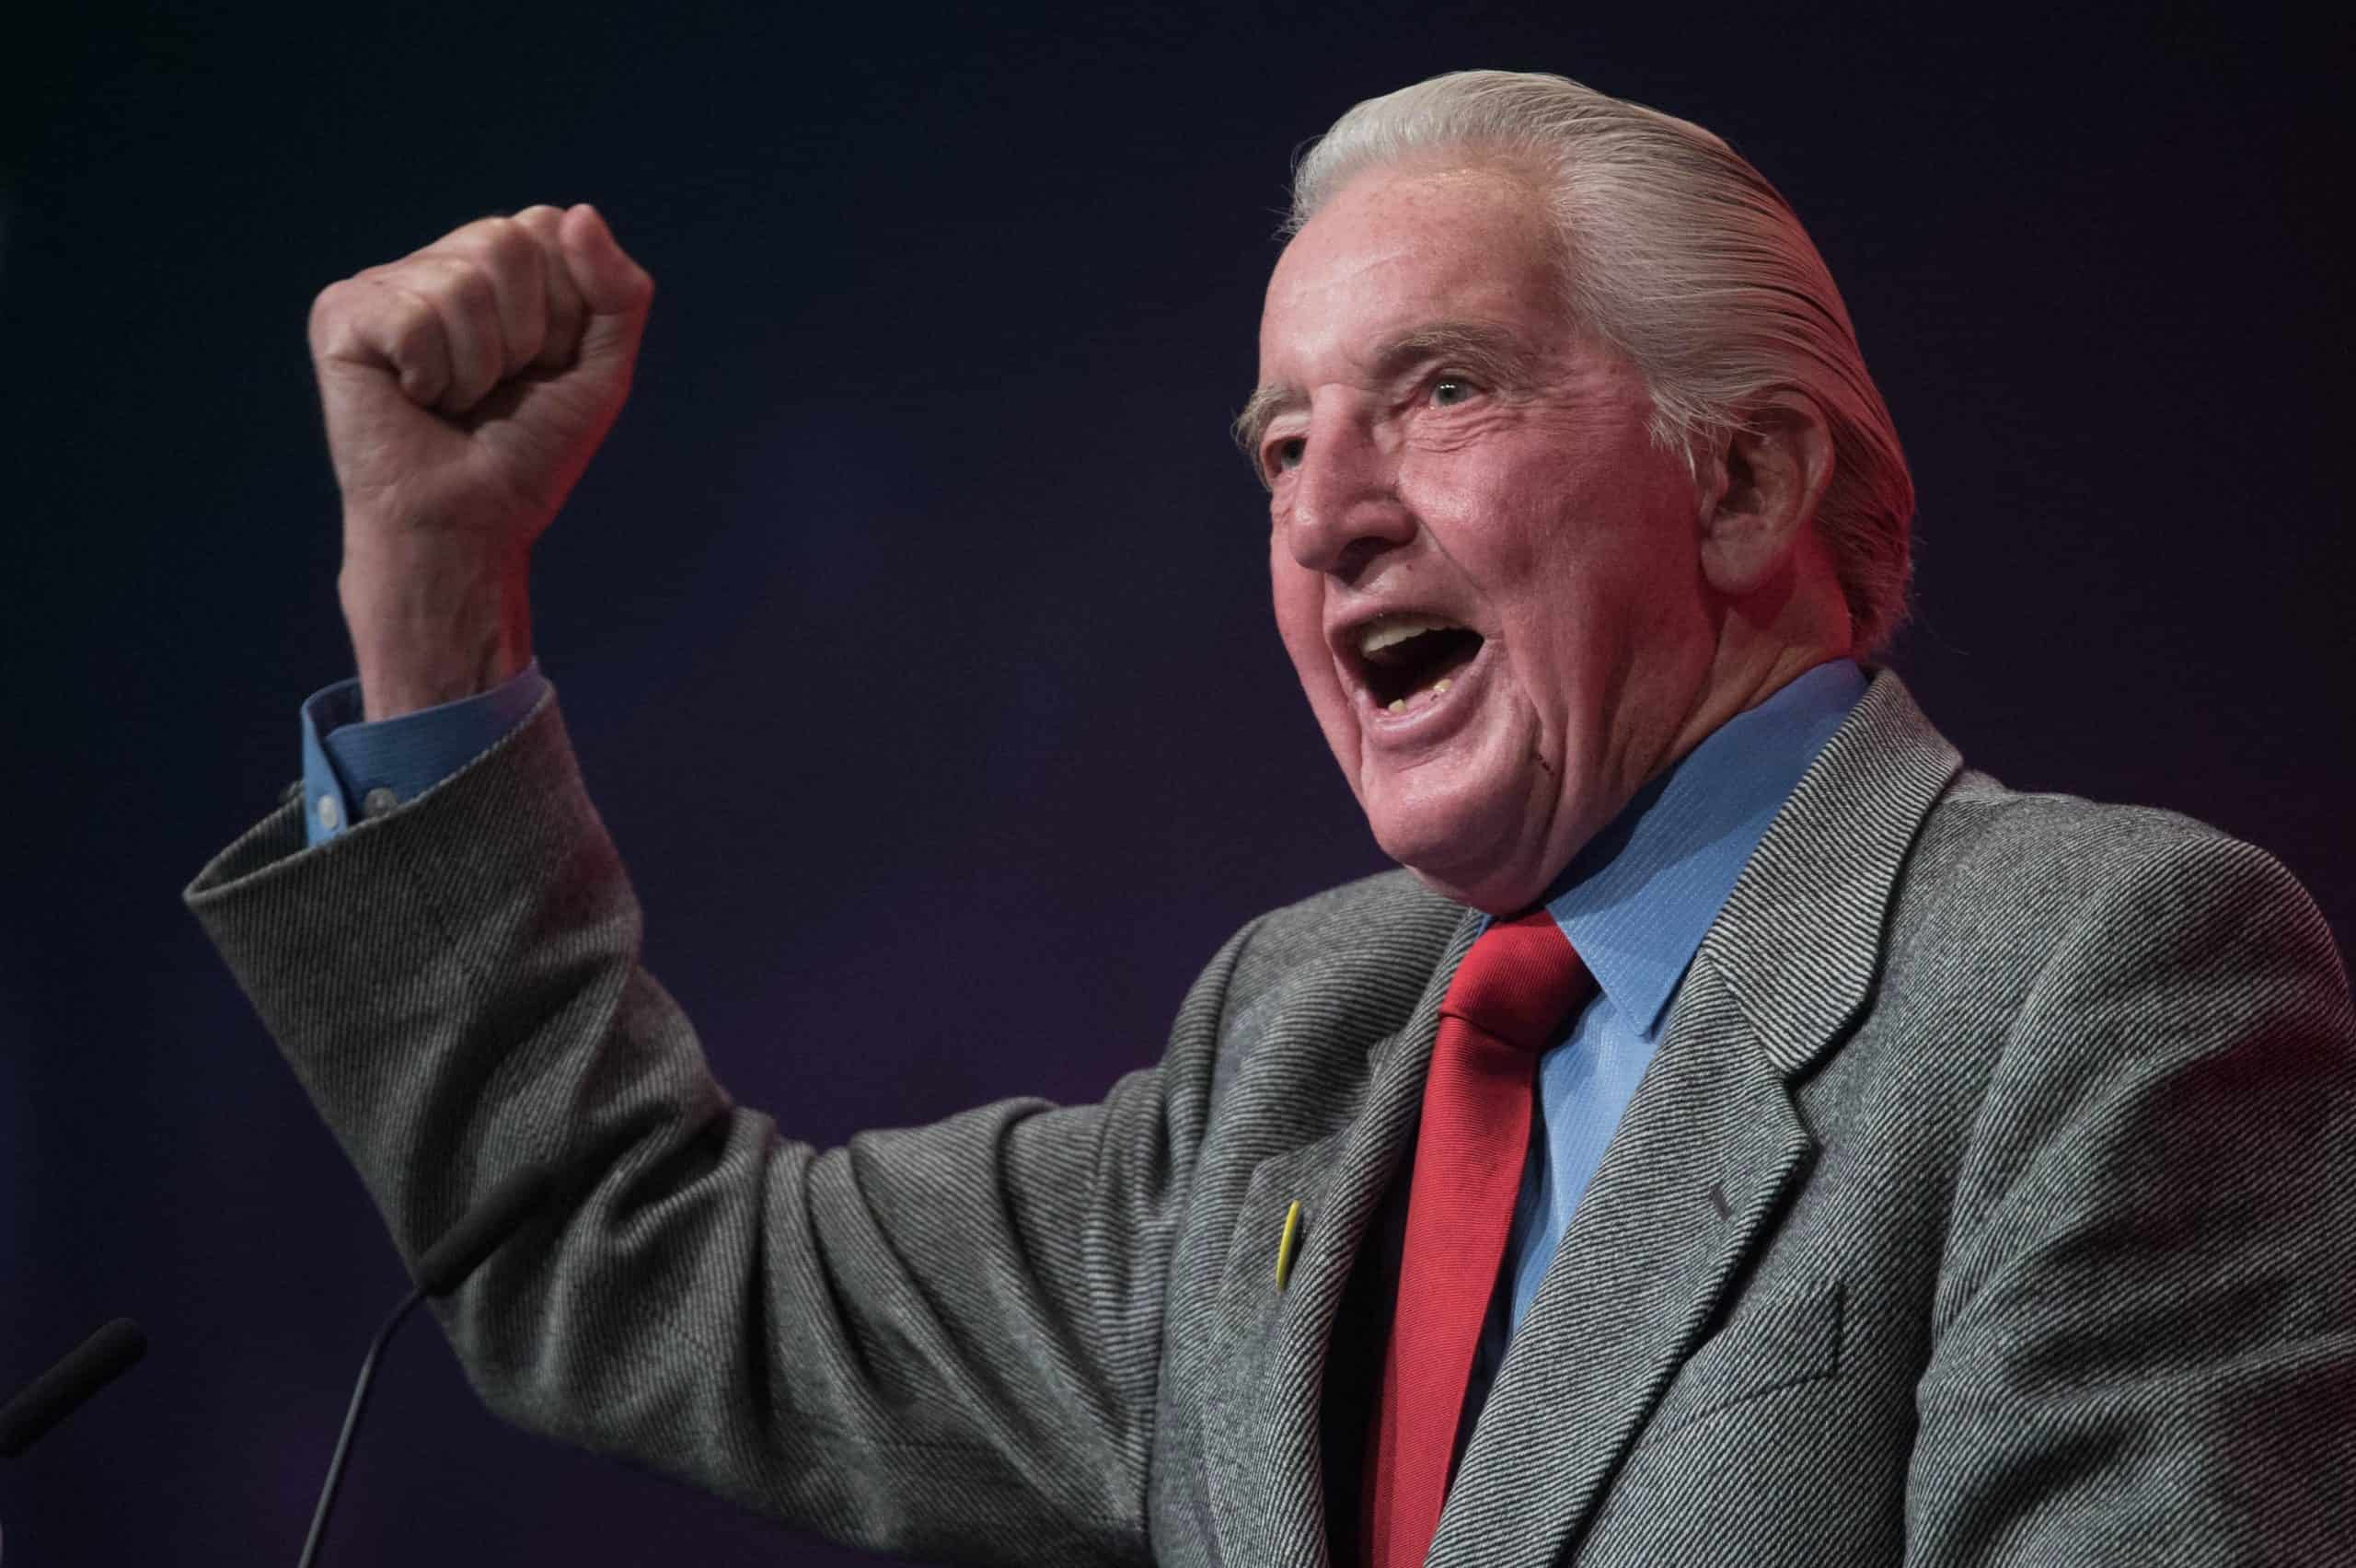 Dennis Skinner single beats Kylie and Lady Gaga to top Amazon charts